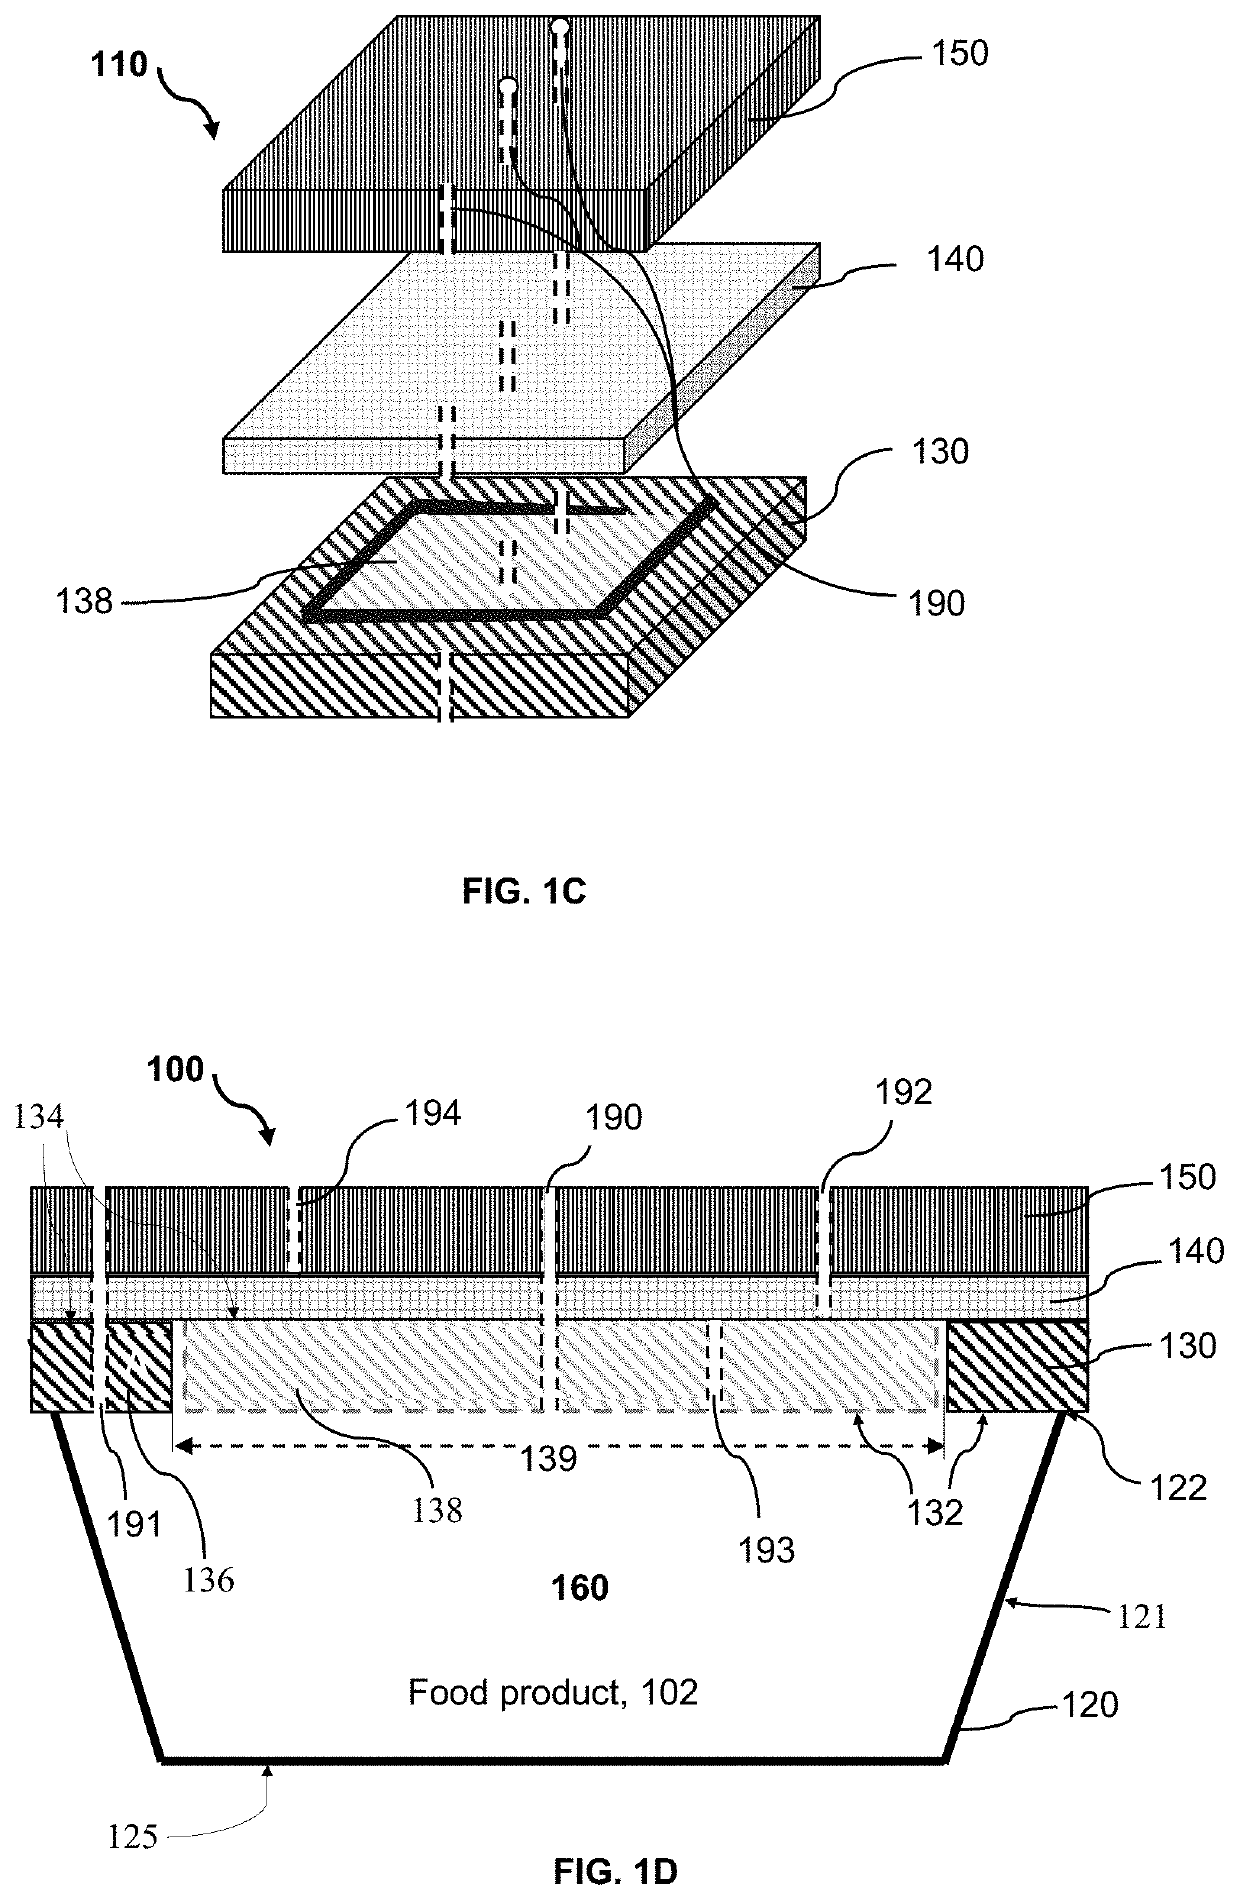 Resealable packaging device and method for packaging food product